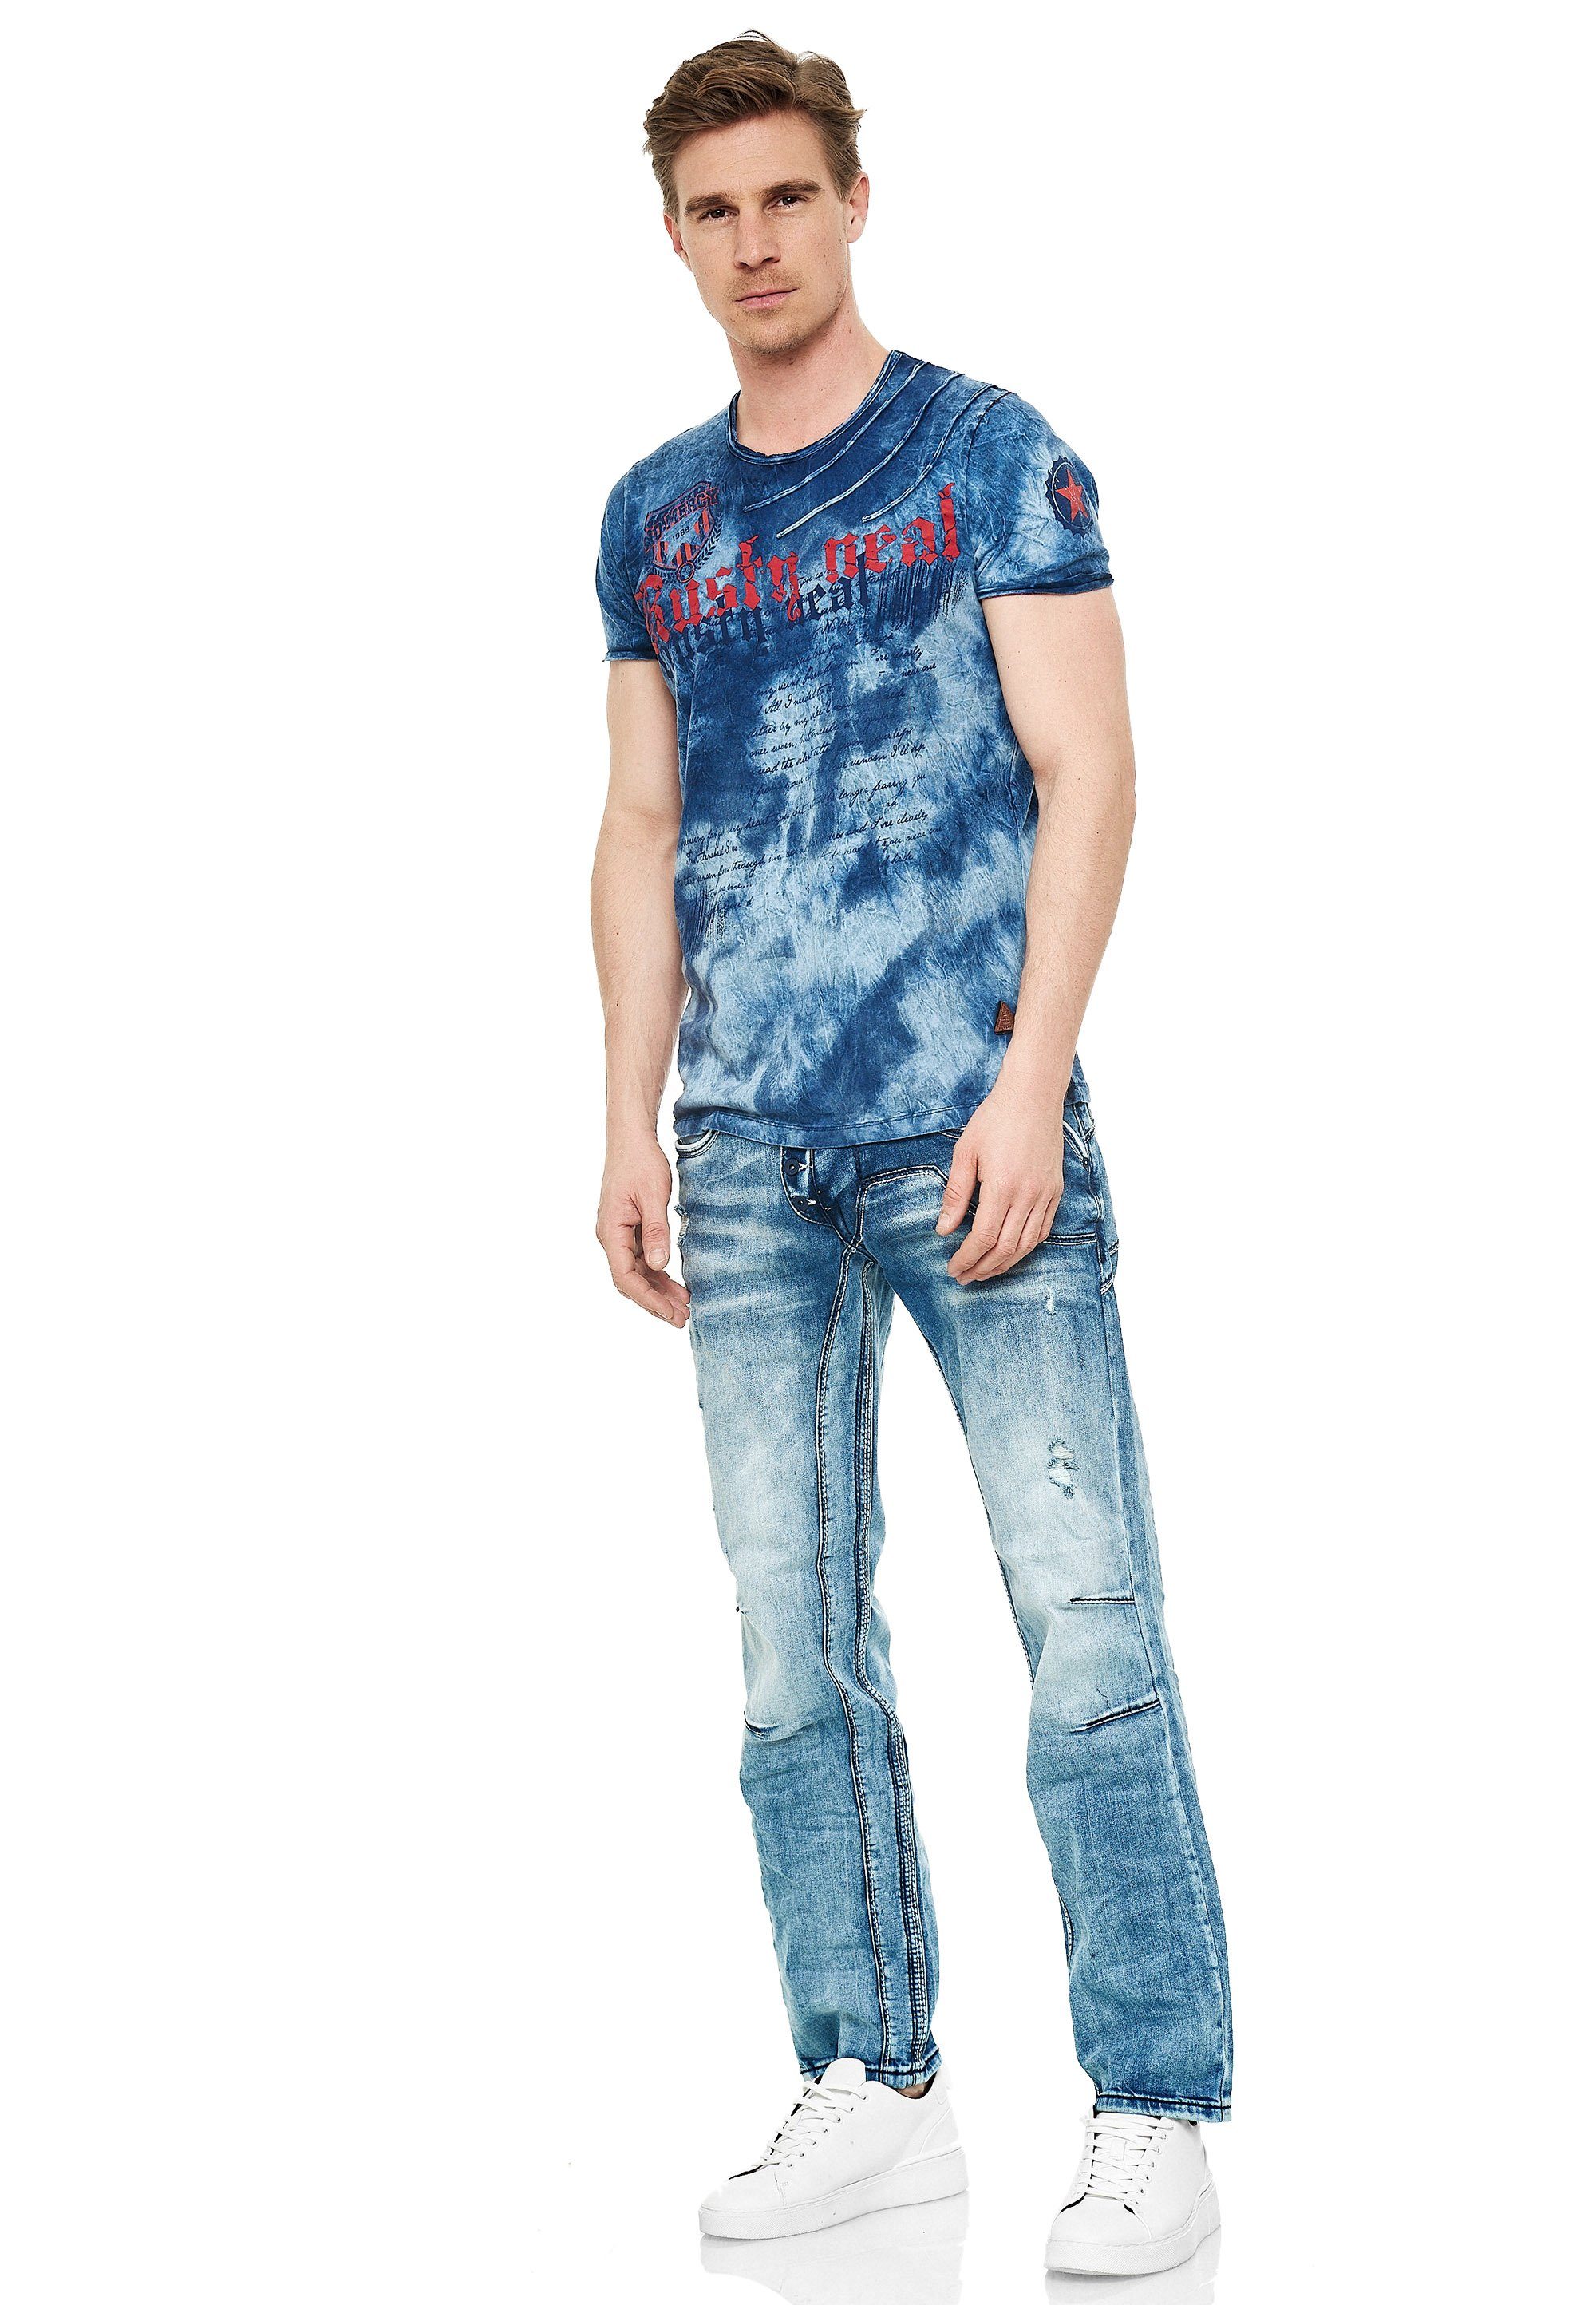 Bequeme Neal Jeans Waschung Rusty mit cooler